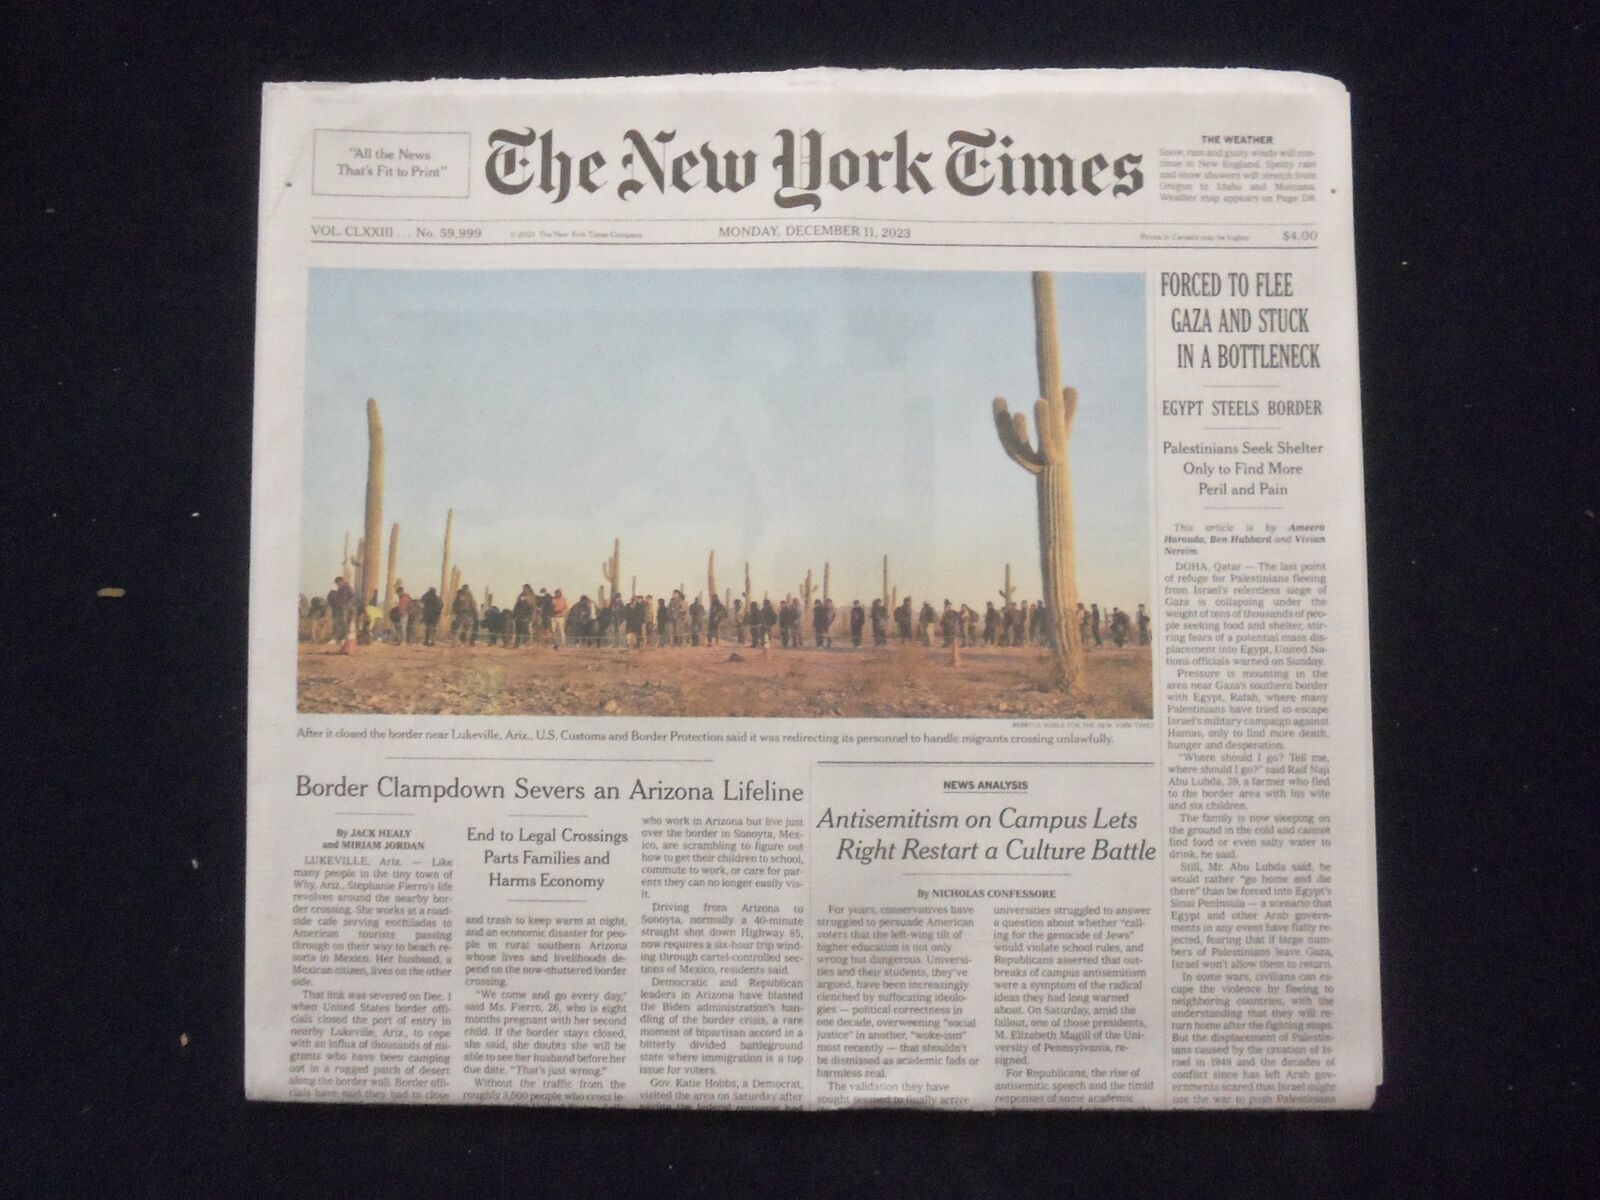 2023 DECEMBER 11 NEW YORK TIMES - FORCED TO FLEE GAZA AND STUCK IN A BOTTLENECK